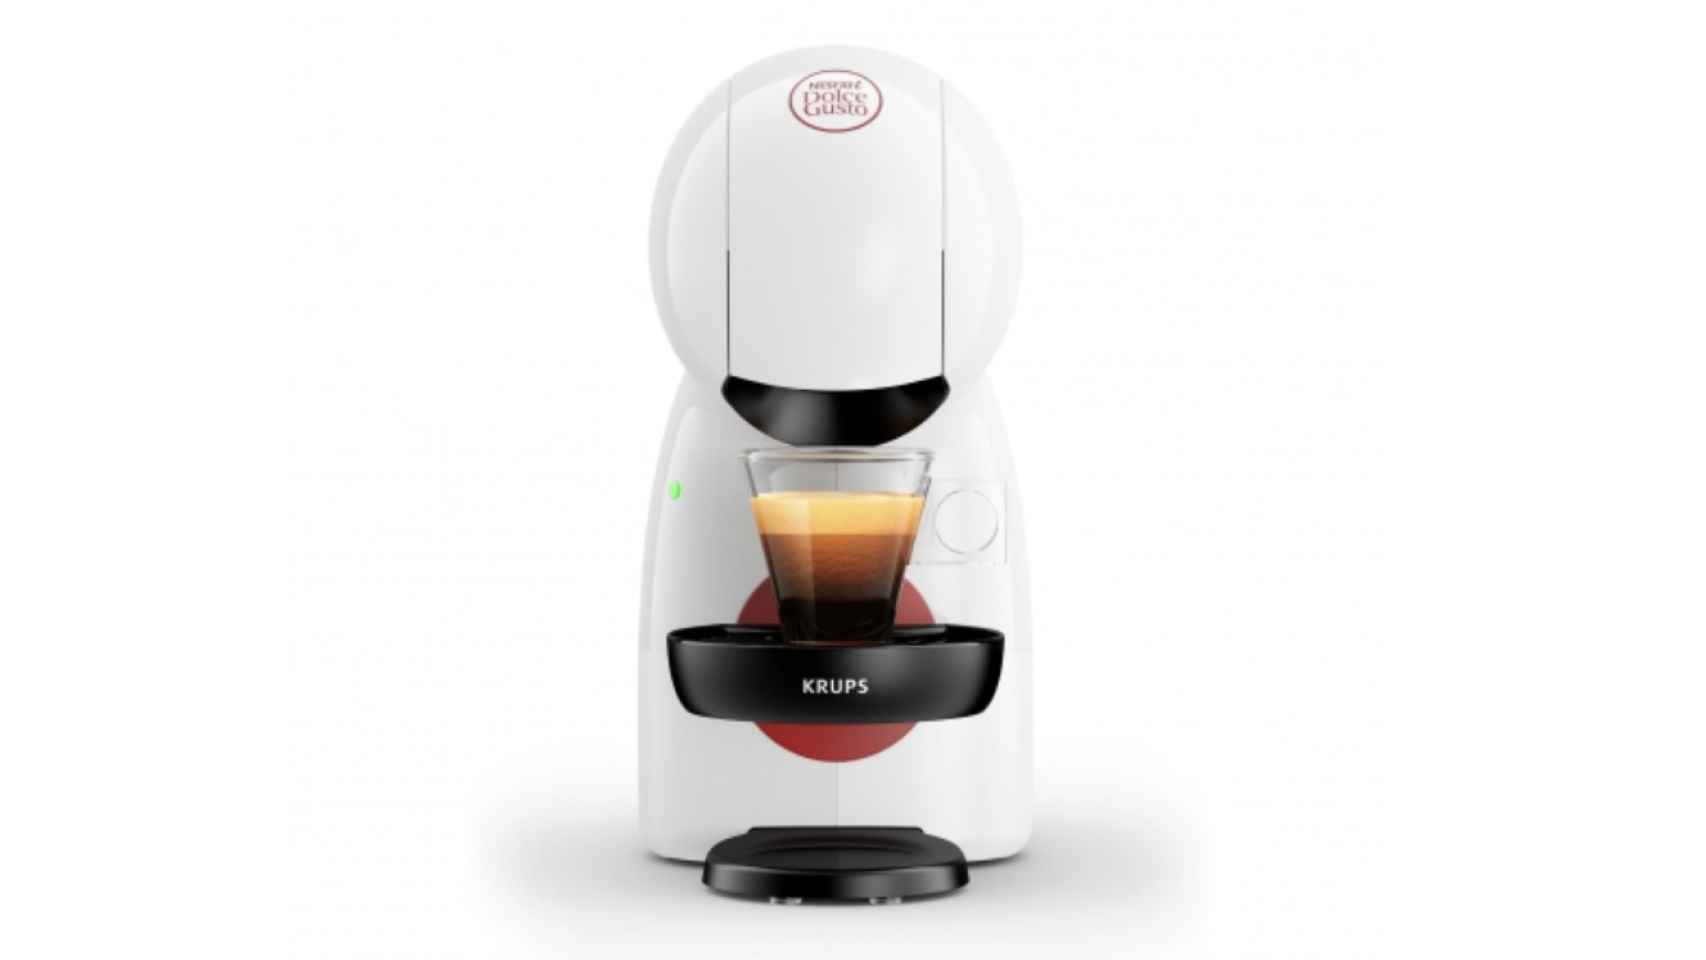 Cafetera Krups Dolce Gusto.